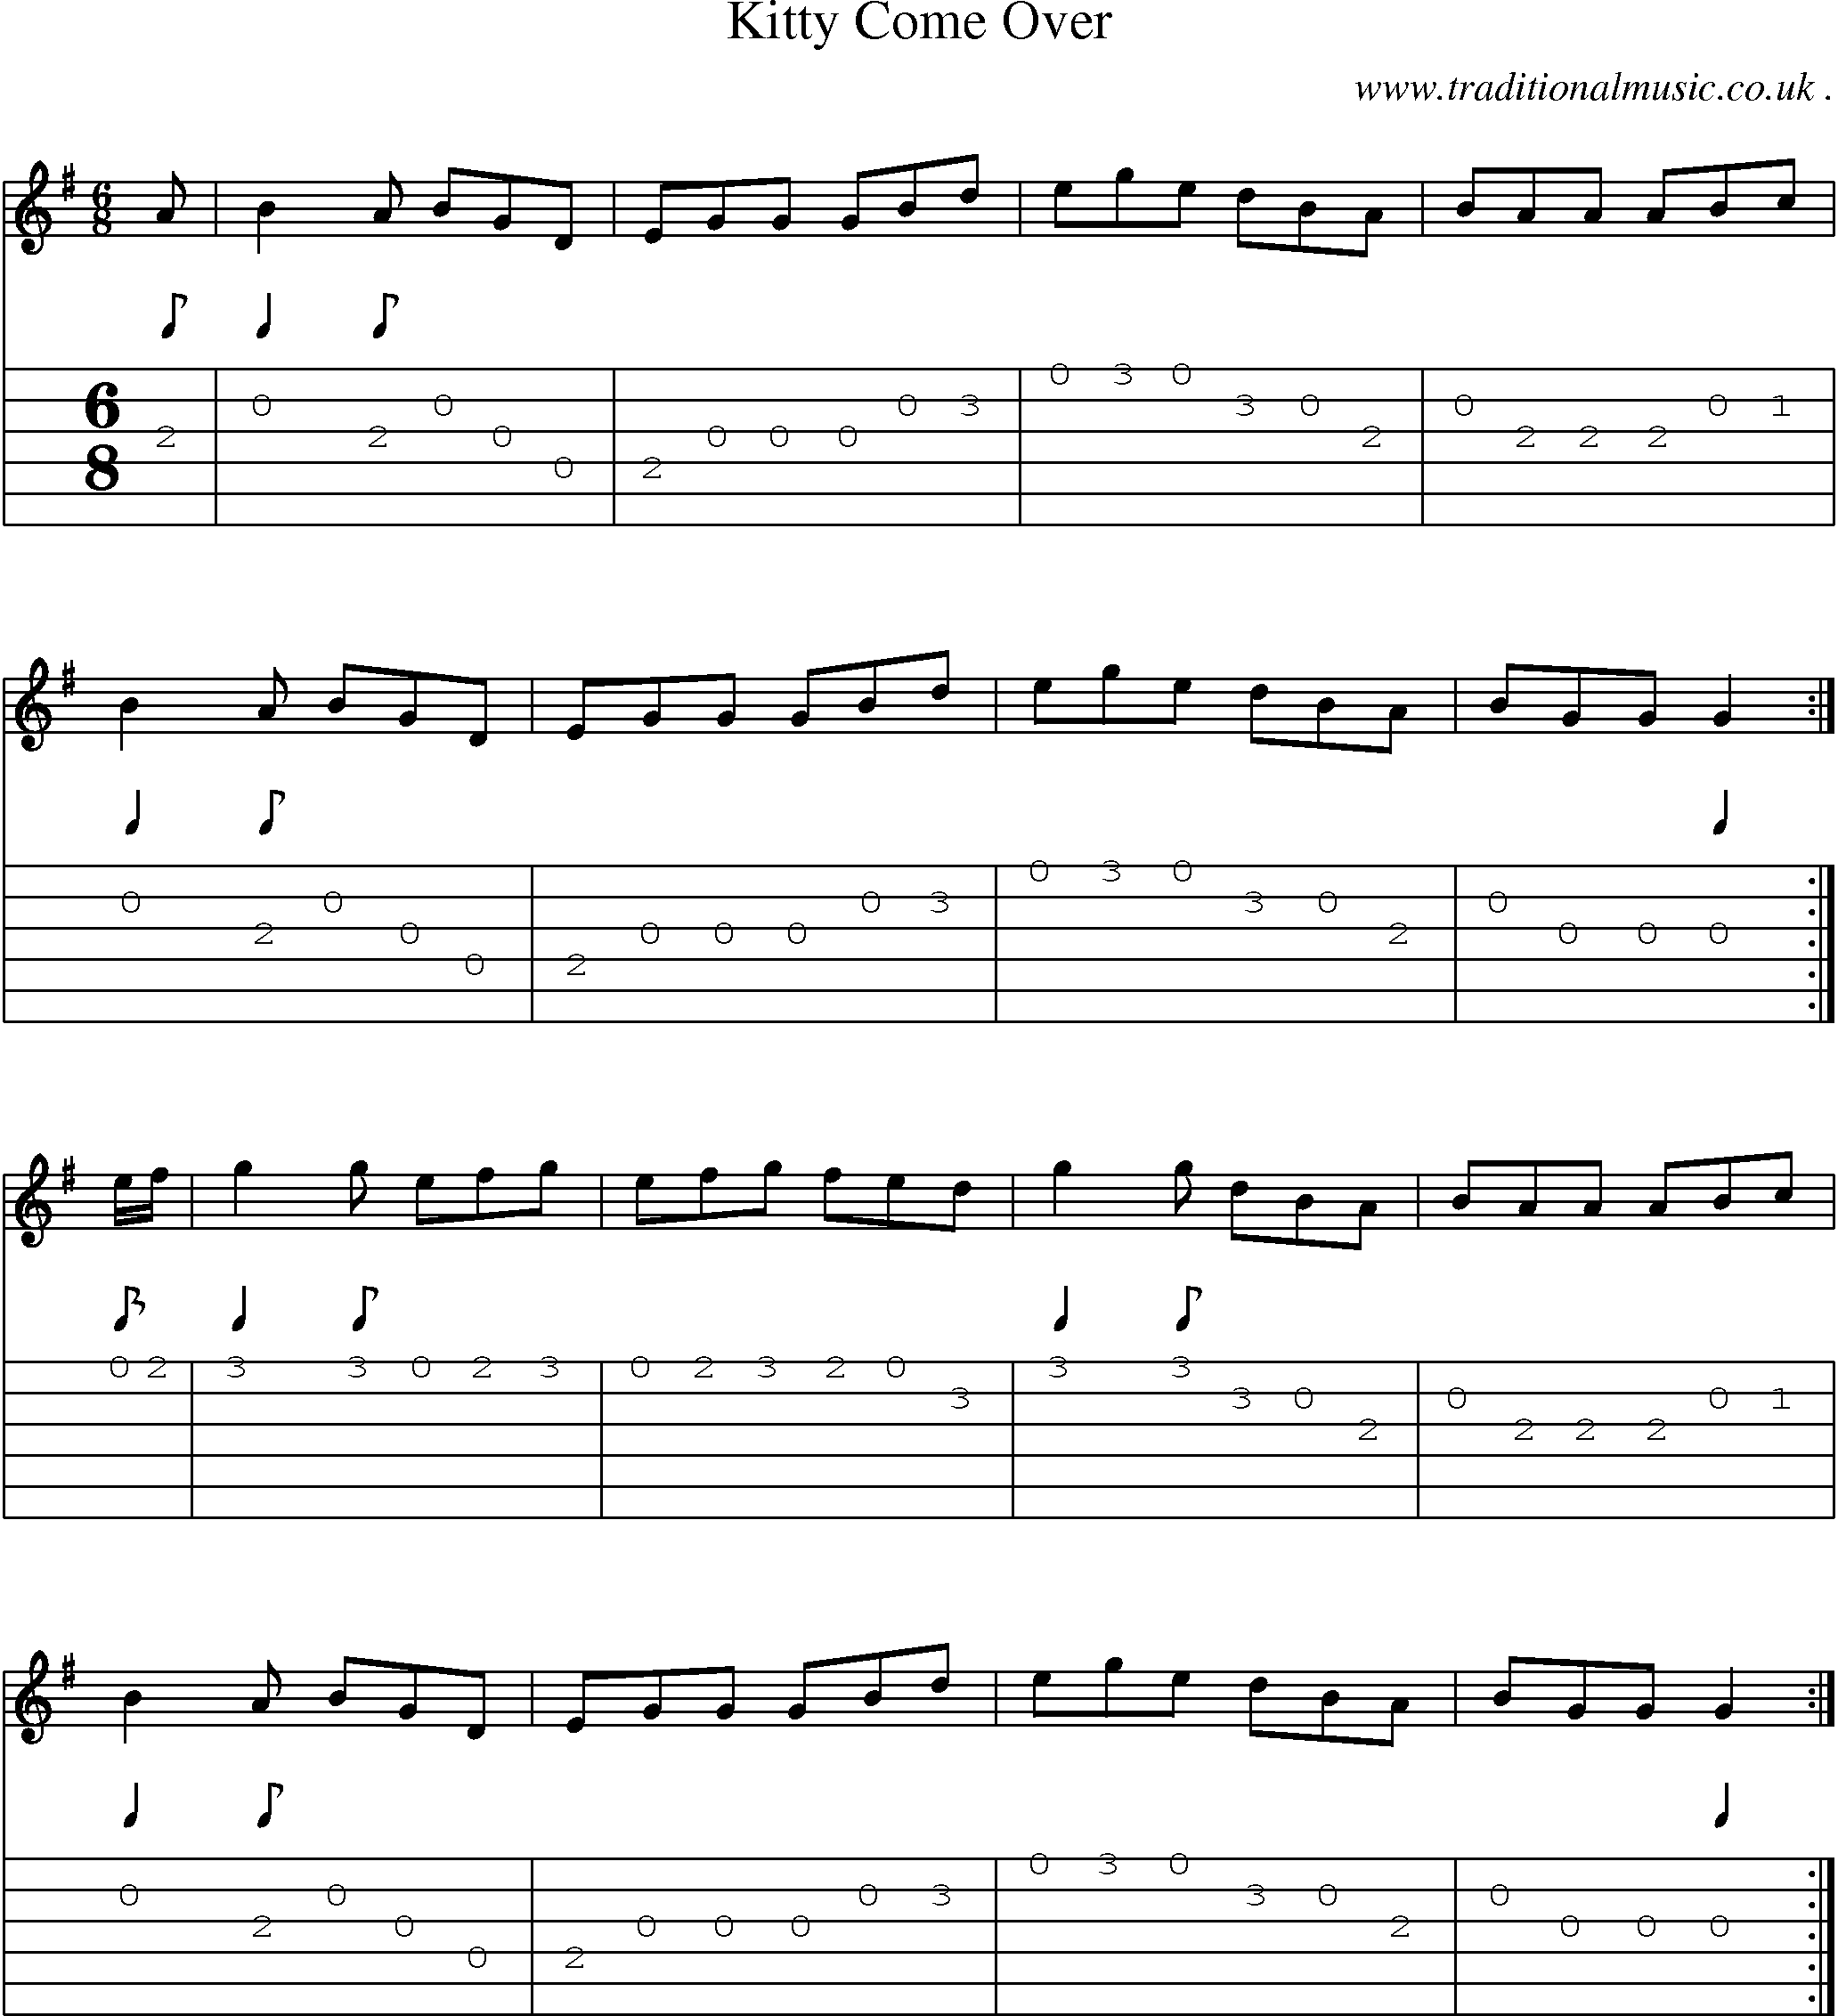 Sheet-Music and Guitar Tabs for Kitty Come Over